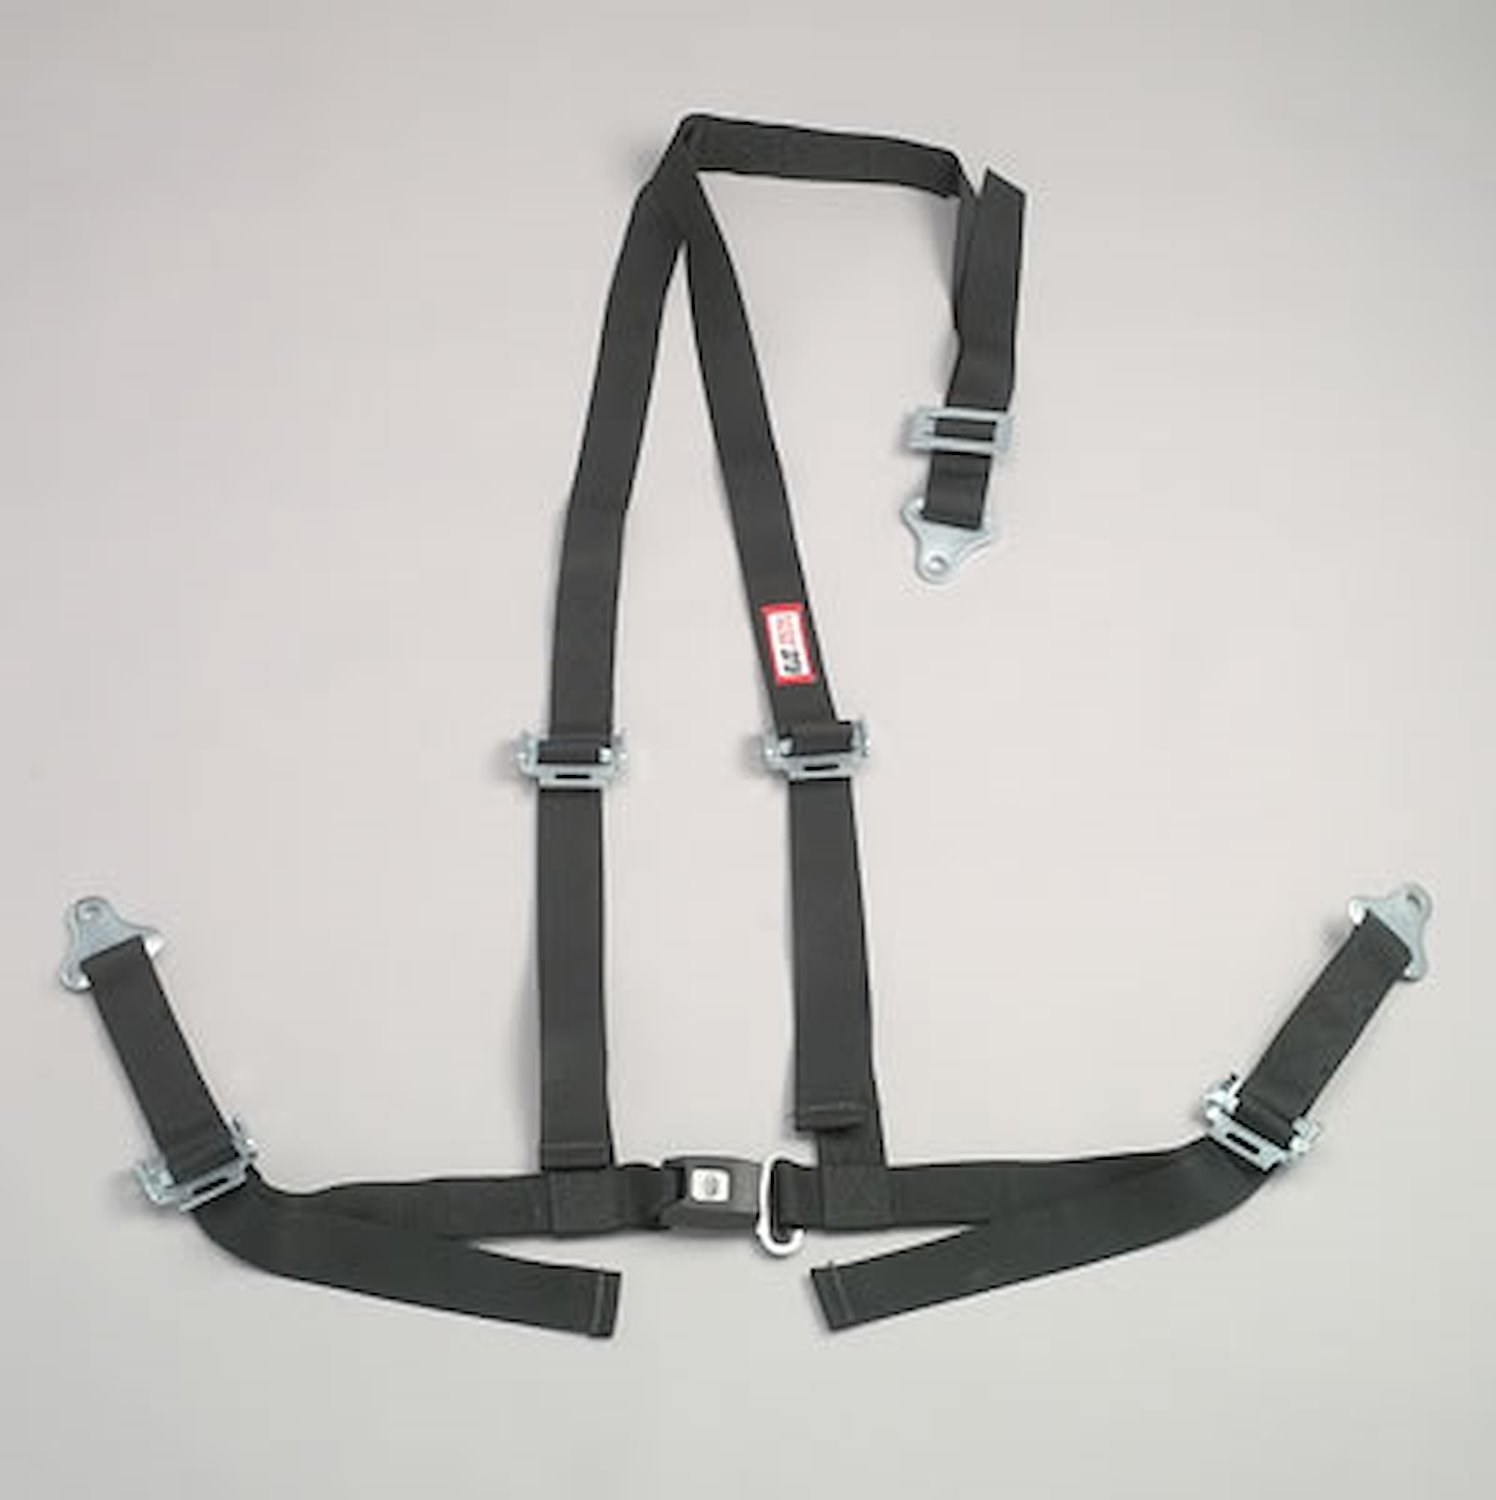 NON-SFI B&T HARNESS 2 PULL DOWN Lap Belt 2 S.H. INDIVIDUAL FLOOR Mount ALL WRAP ENDS OD GREEN